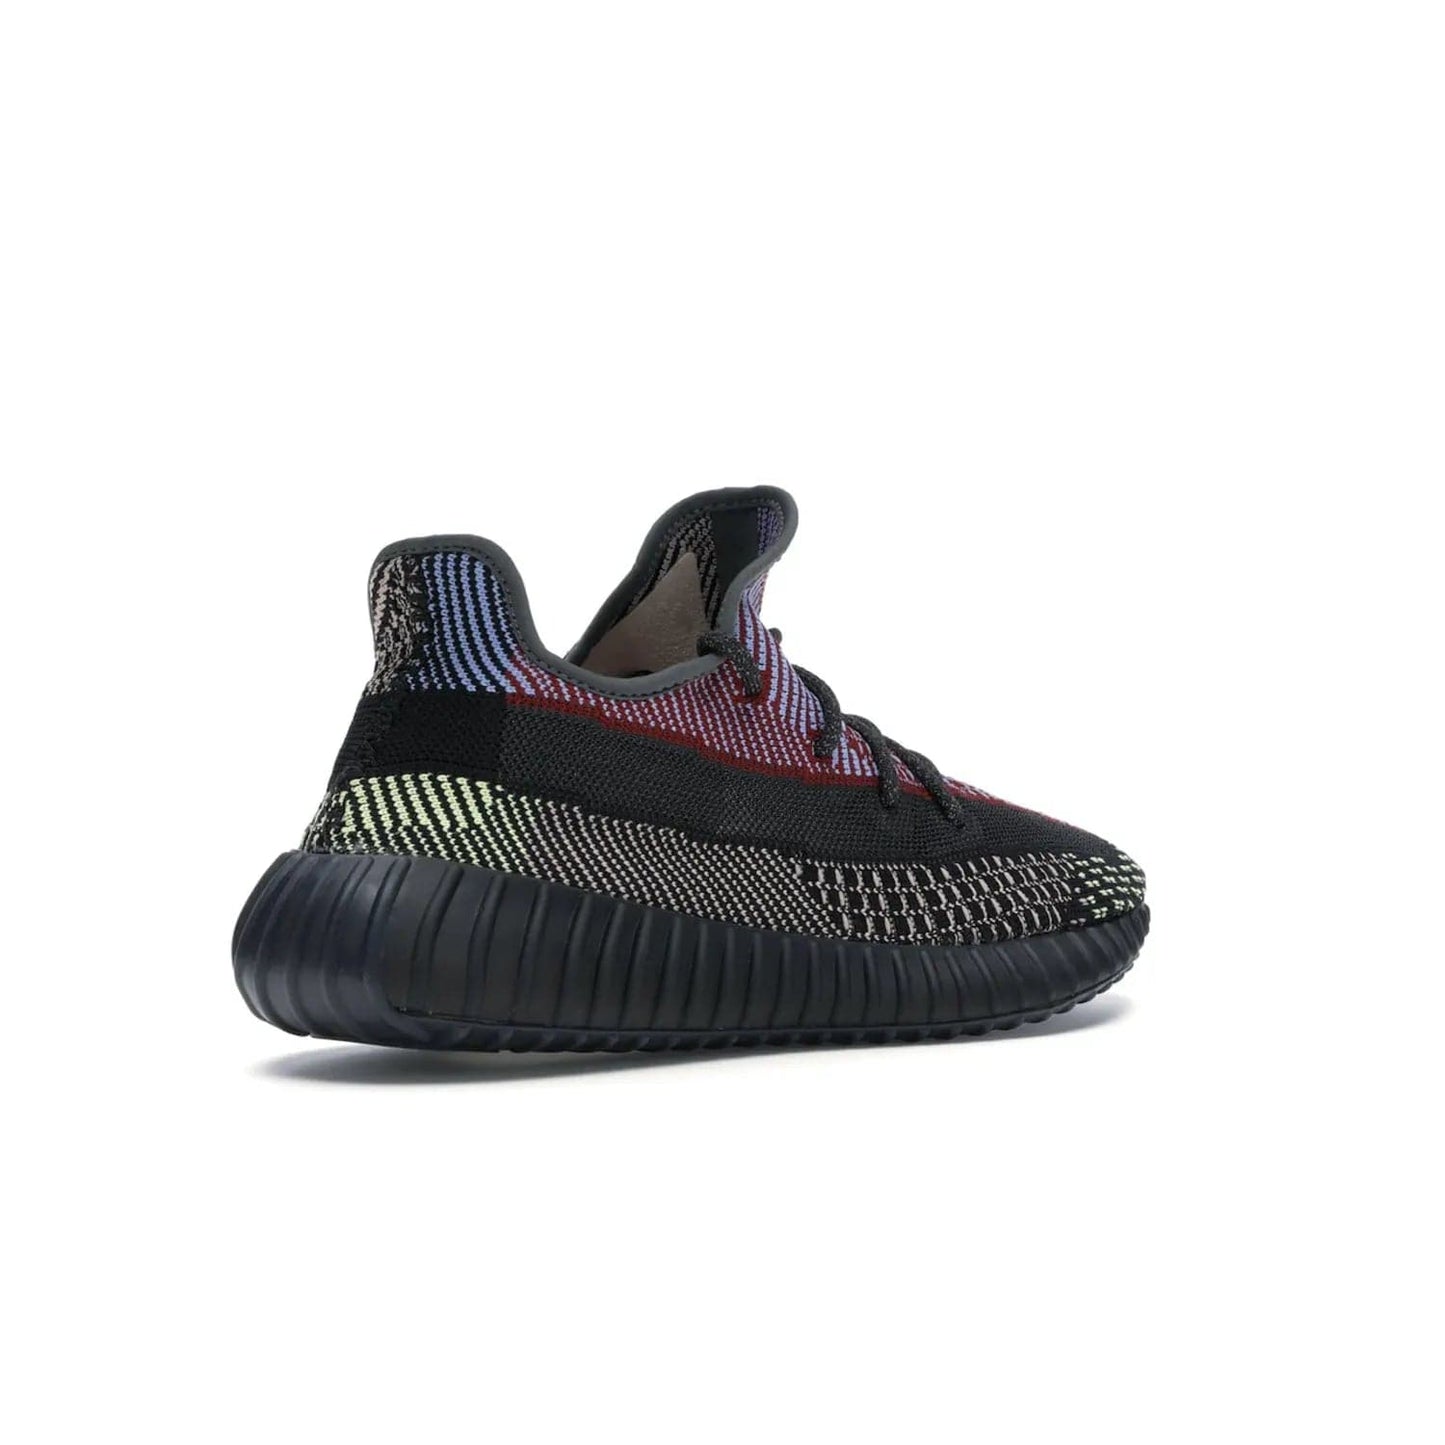 adidas Yeezy Boost 350 V2 Yecheil (Non-Reflective) - Image 33 - Only at www.BallersClubKickz.com - Make a statement with the eye-catching adidas Yeezy Boost 350 V2 Yecheil Non-Reflective. Featuring a spectrum of colorful hues, black upper, Boost cushioning, and black side stripe, the sneaker brings a luxe yet playful finish to any outfit.